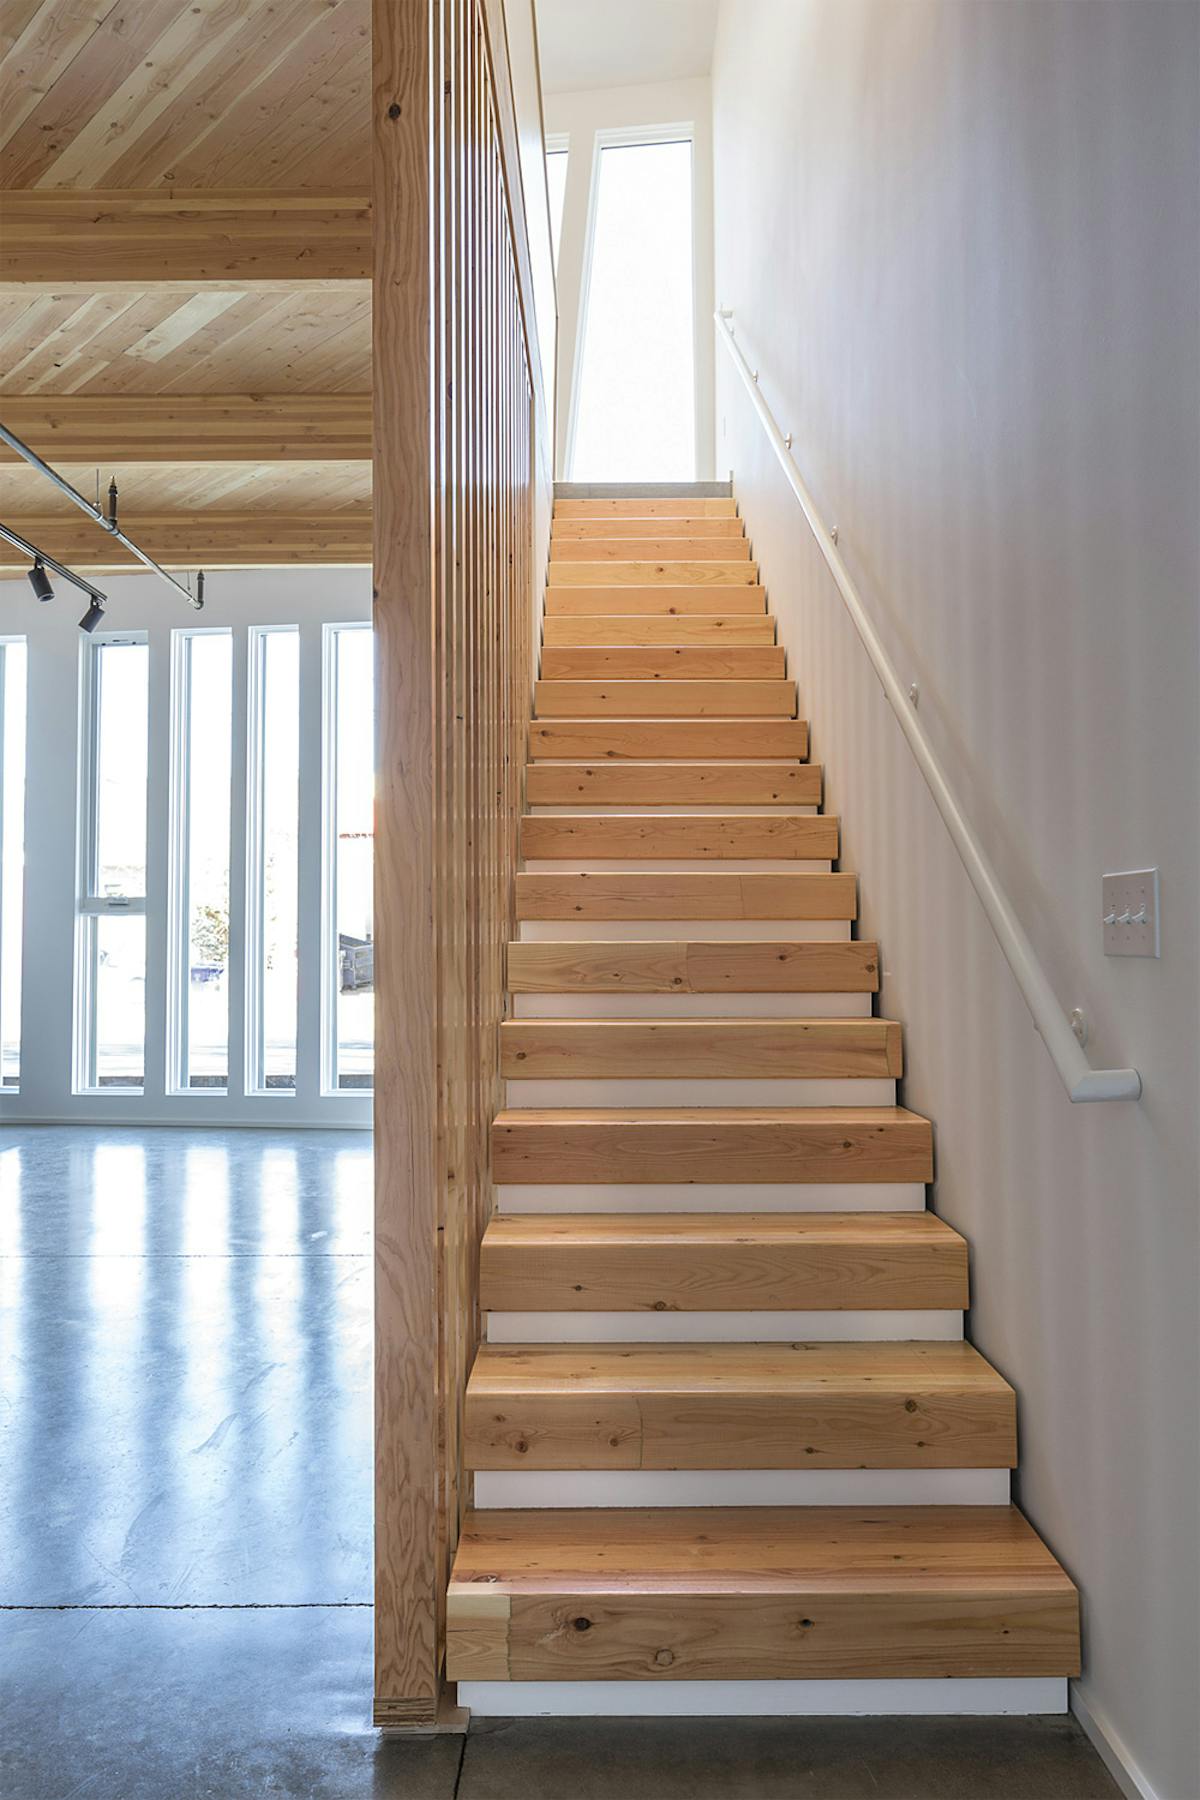 Ten Top Images on Archinect's "Stairs" Pinterest Board News Archinect